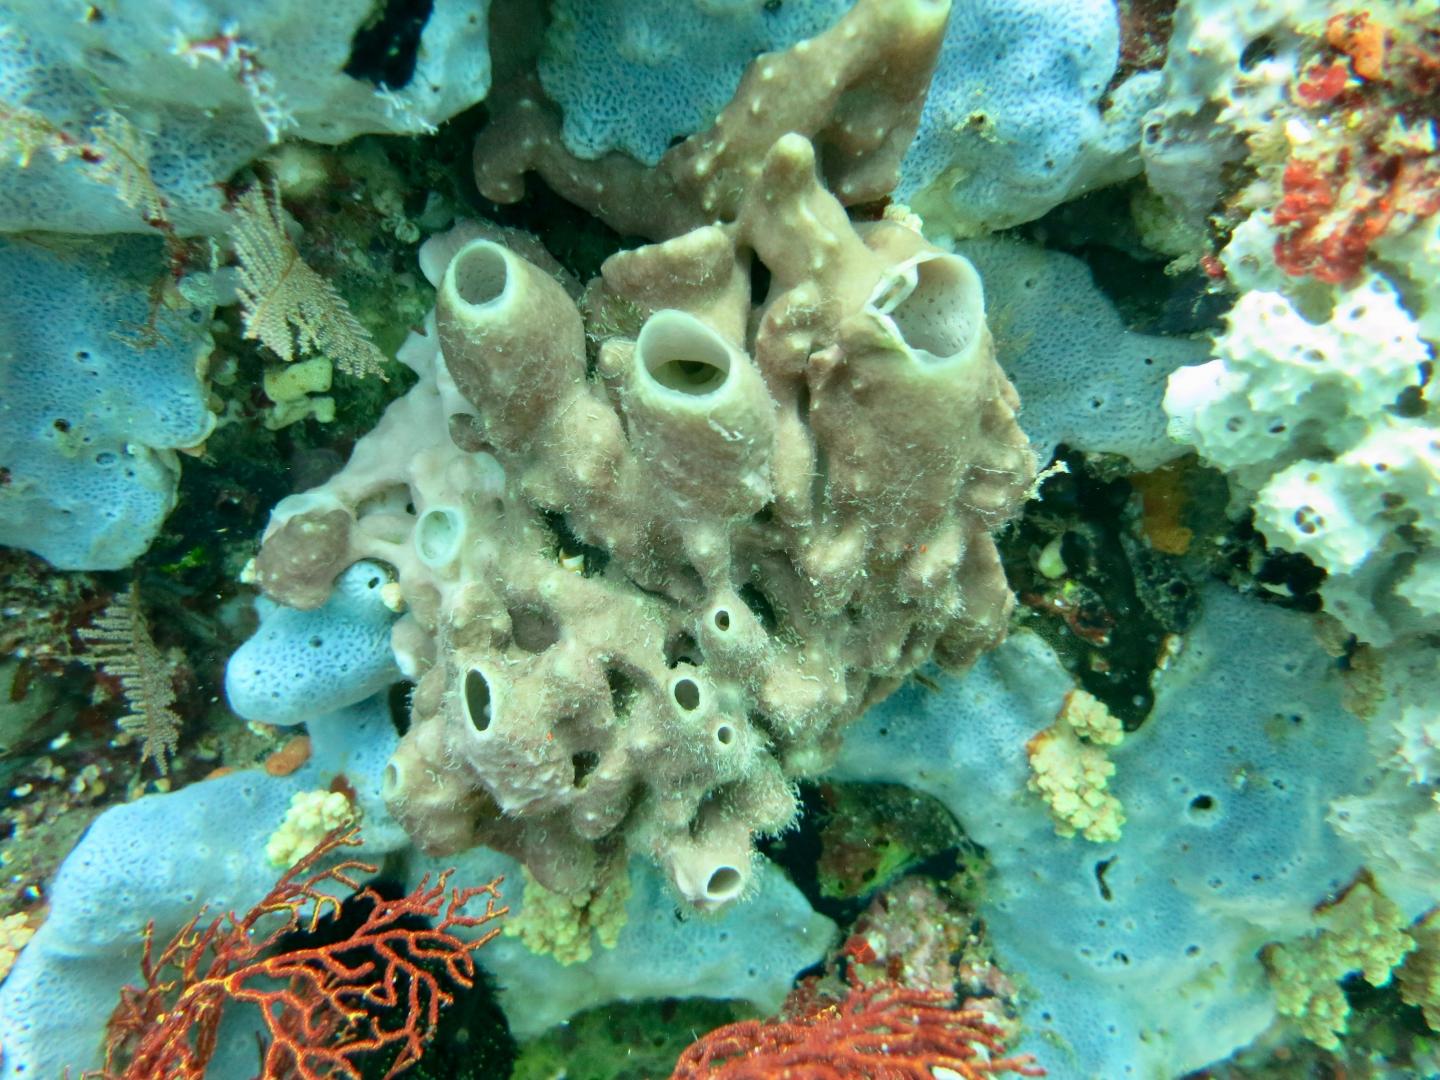 Sponges Are the Sister Group to All Other Extant Animal Lineages